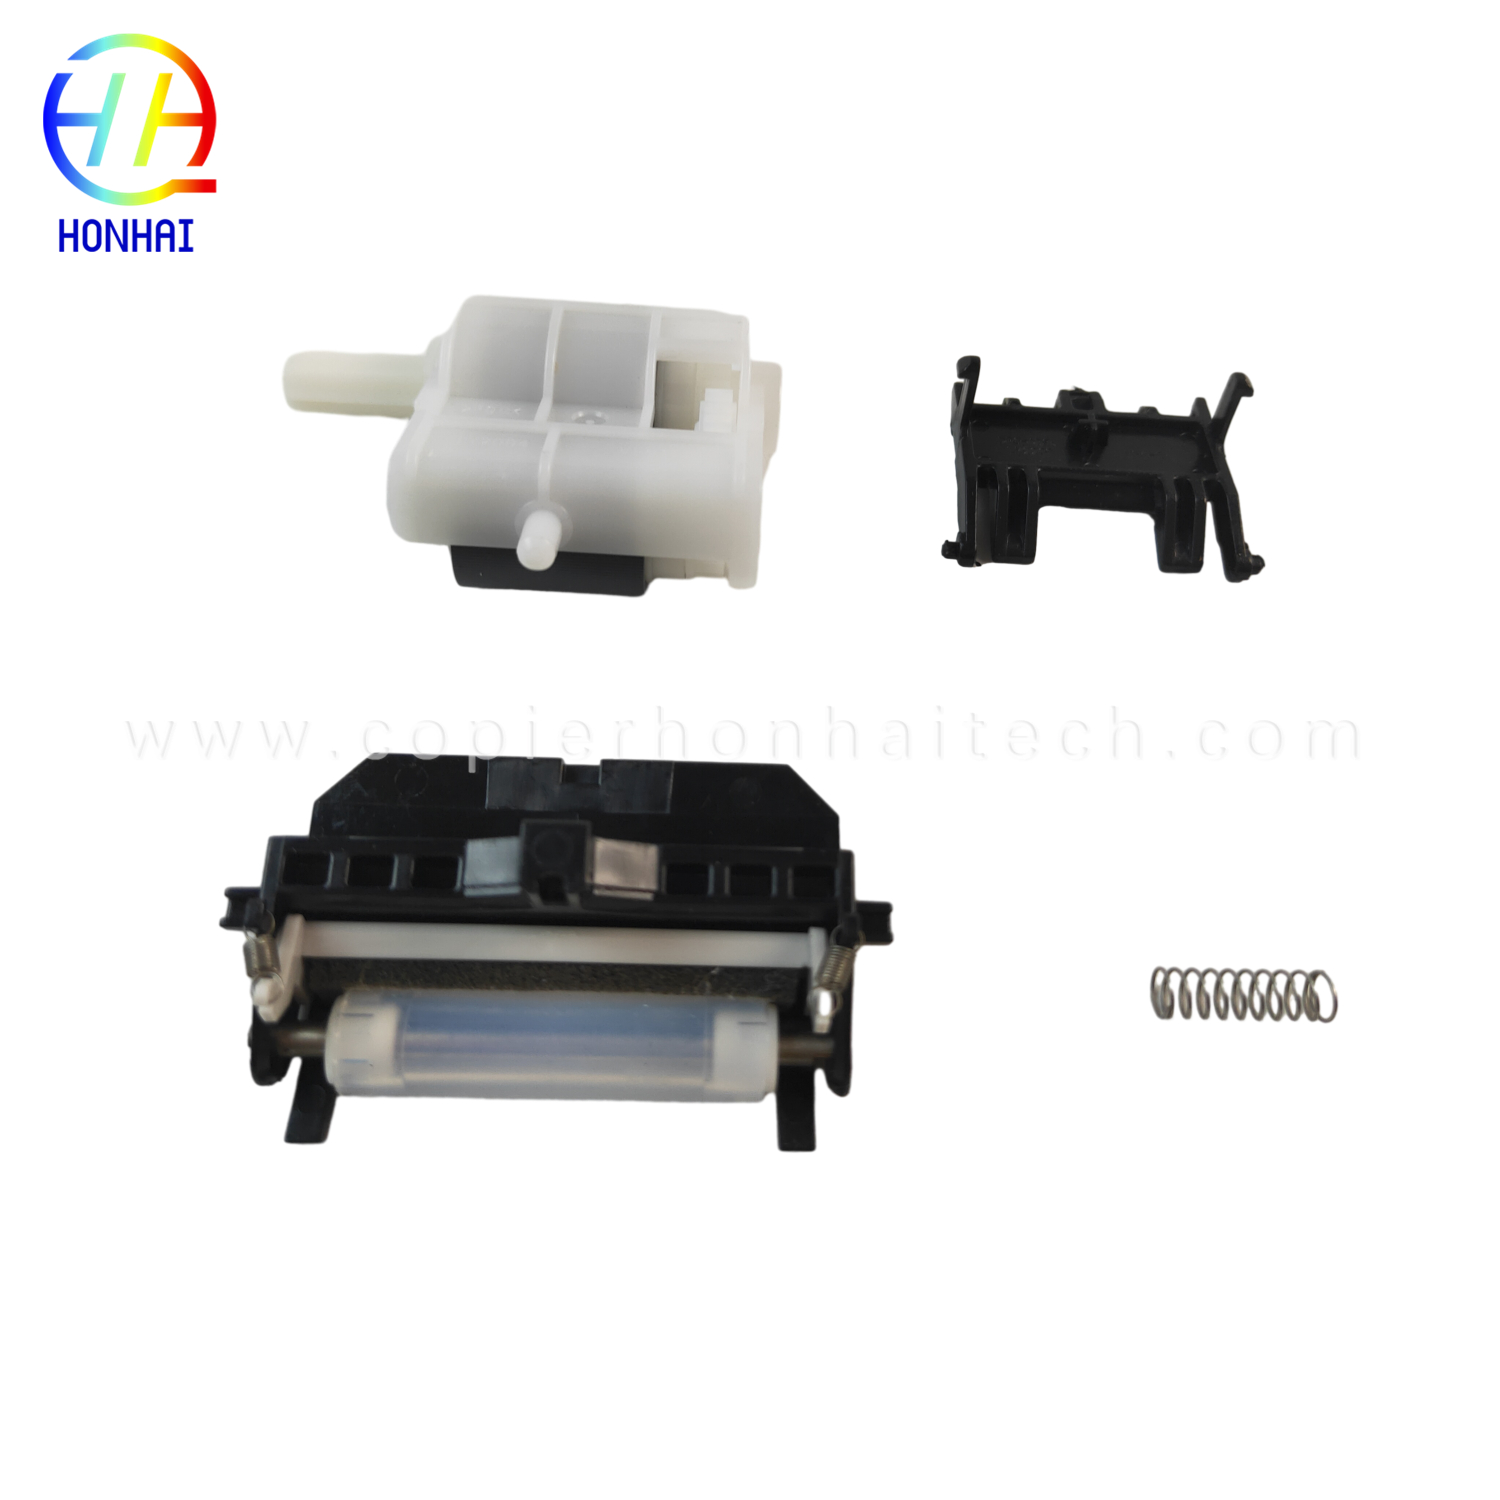 https://www.copierhonhaitech.com/pickup-feed-assembly-and-separation-pad-kit-for-brother-dcp-l2540dw-product/